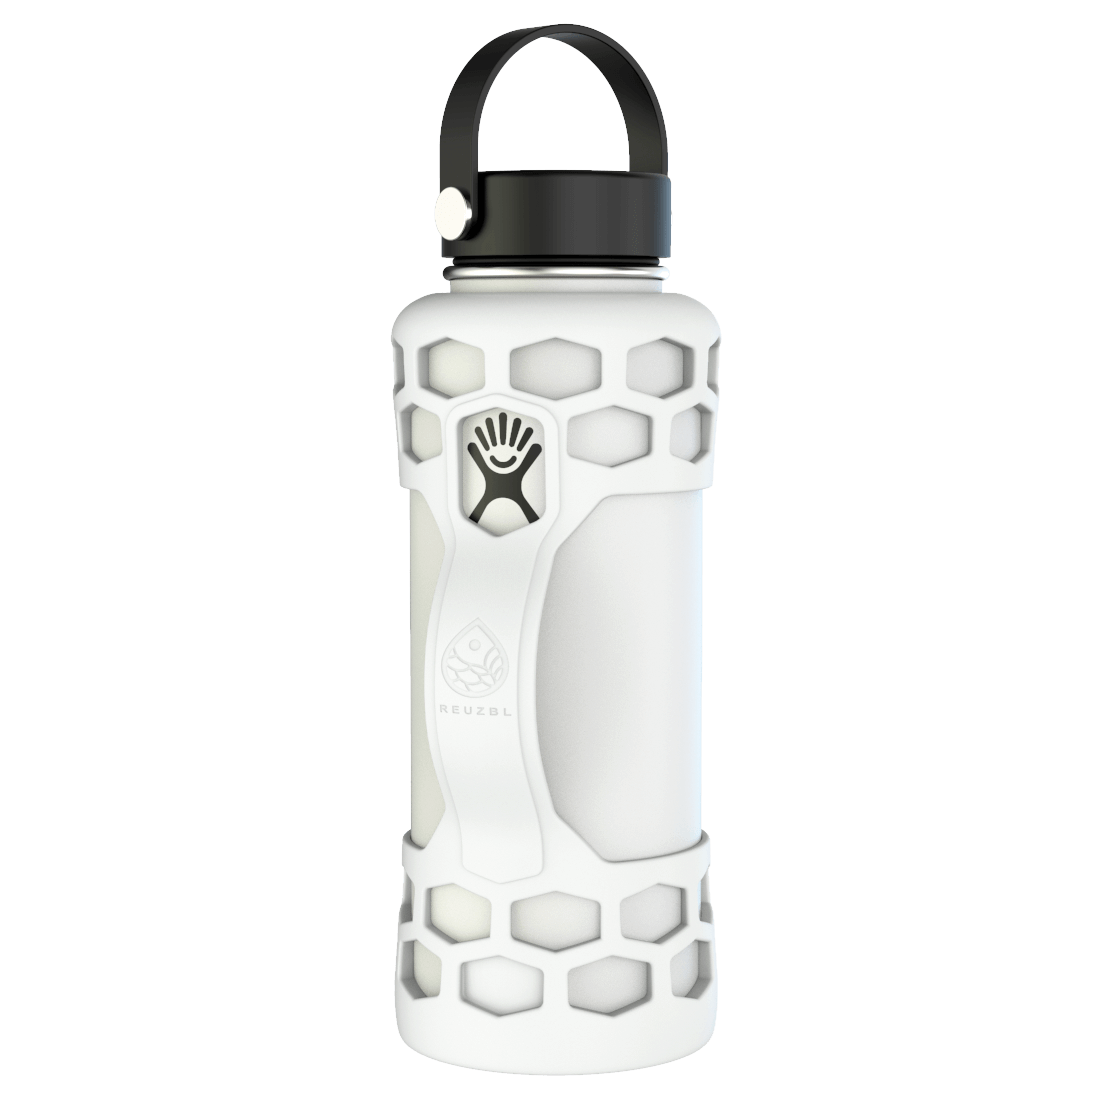 Bottle Bumper Protective Sleeve for Hydro Flask